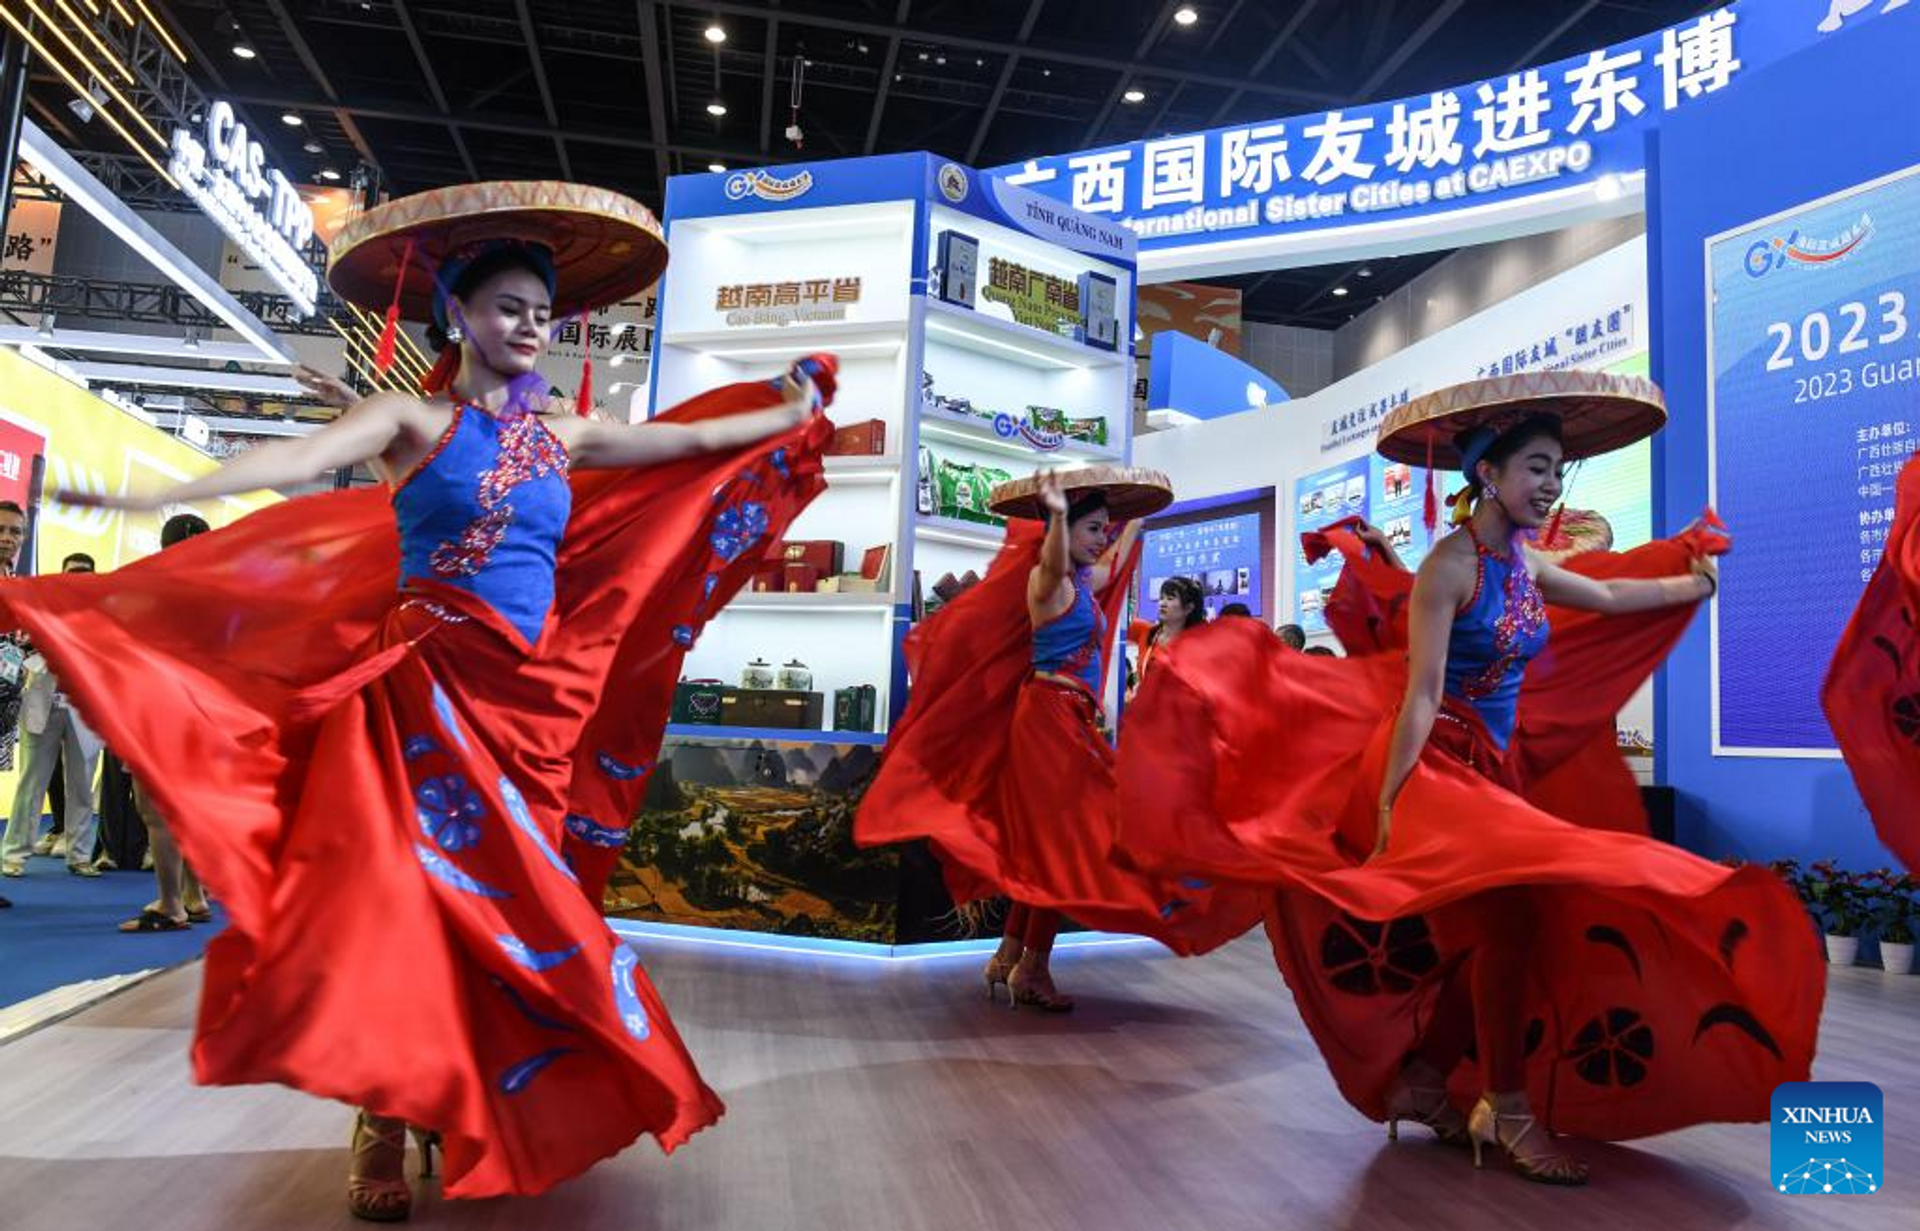 Actresses perform dance near a booth of Vietnam at Belt and Road International Pavilion during the 20th China-ASEAN Expo at Nanning International Convention and Exhibition Center in Nanning, capital of south China's Guangxi Zhuang Autonomous Region, Sept. 17, 2023. The opening ceremony of the 20th China-ASEAN Expo and China-ASEAN Business and Investment Summit was held on Sunday in Nanning - Sputnik International, 1920, 18.09.2023